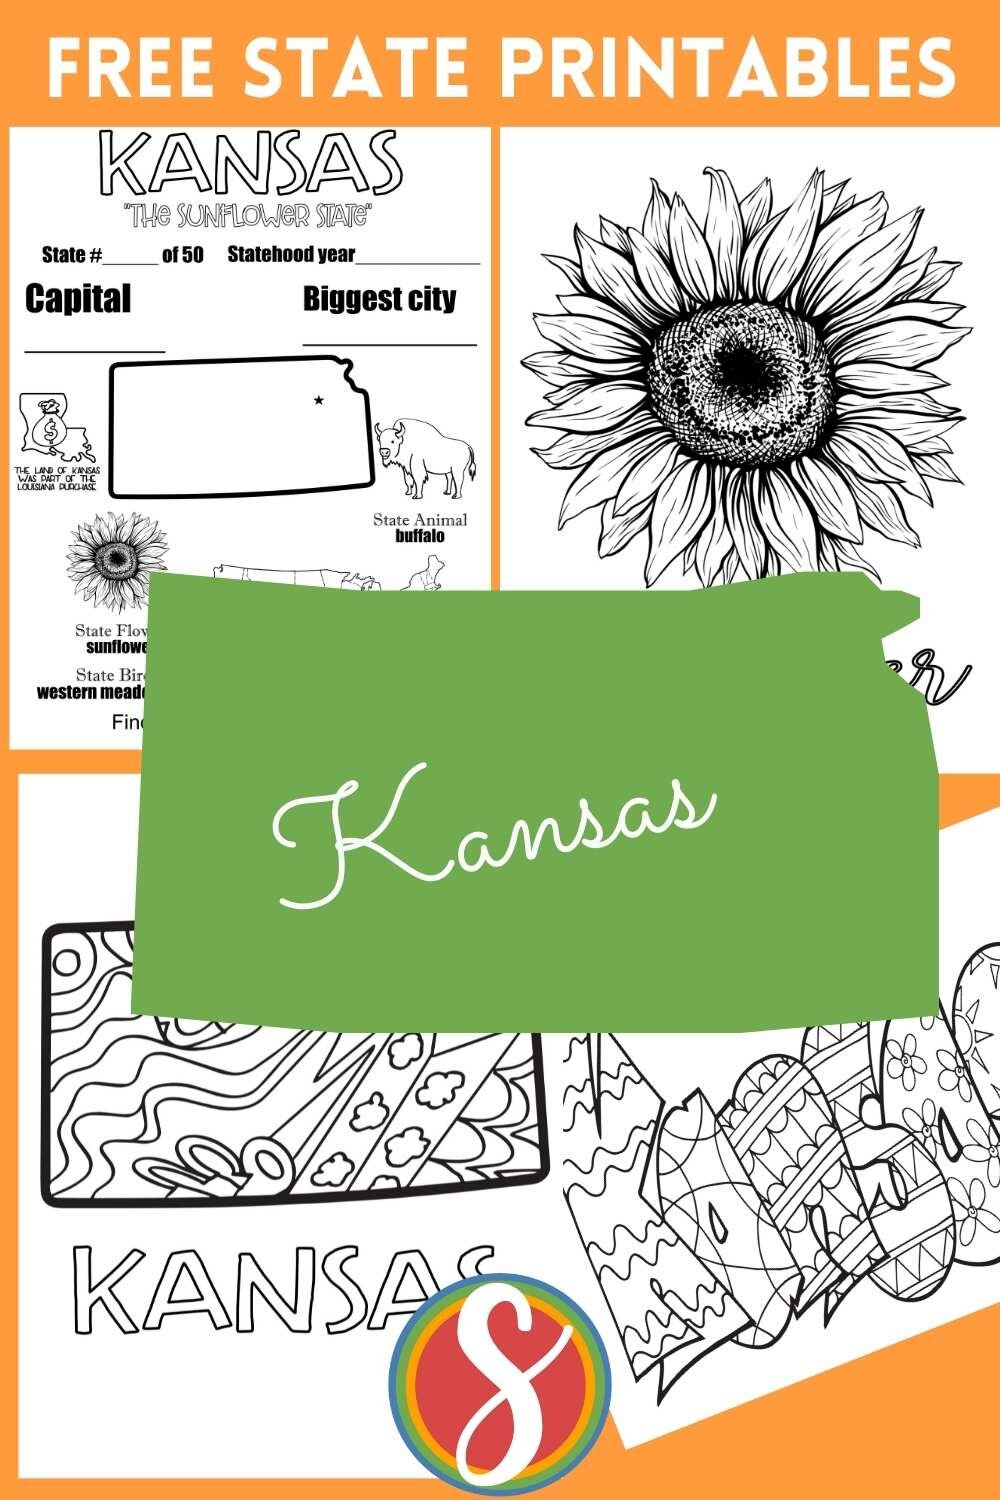 Free 4 Kansas coloring pages to print and color from Stevie Doodles - print and color these Kansas pages today